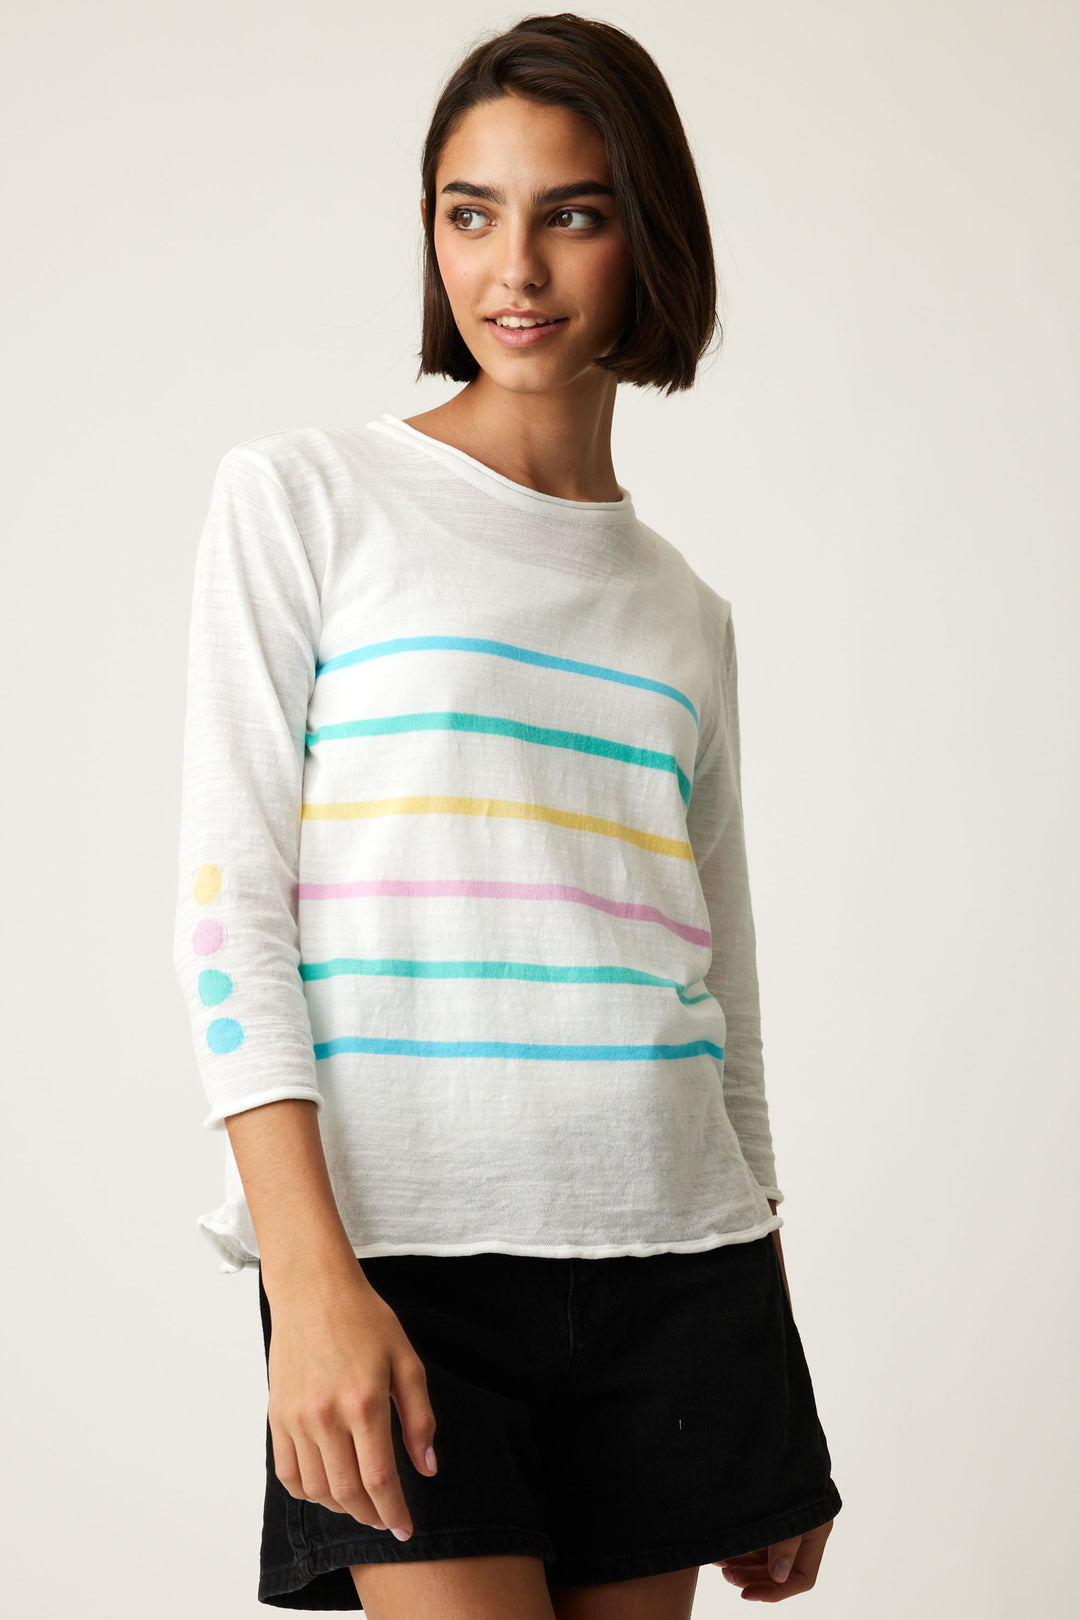 Cotton Country Spring 2024 Made of light and soft knit cotton, this sweater top features a bright stripe design pattern, contrast cuffs and hem and 3/4 length sleeves.